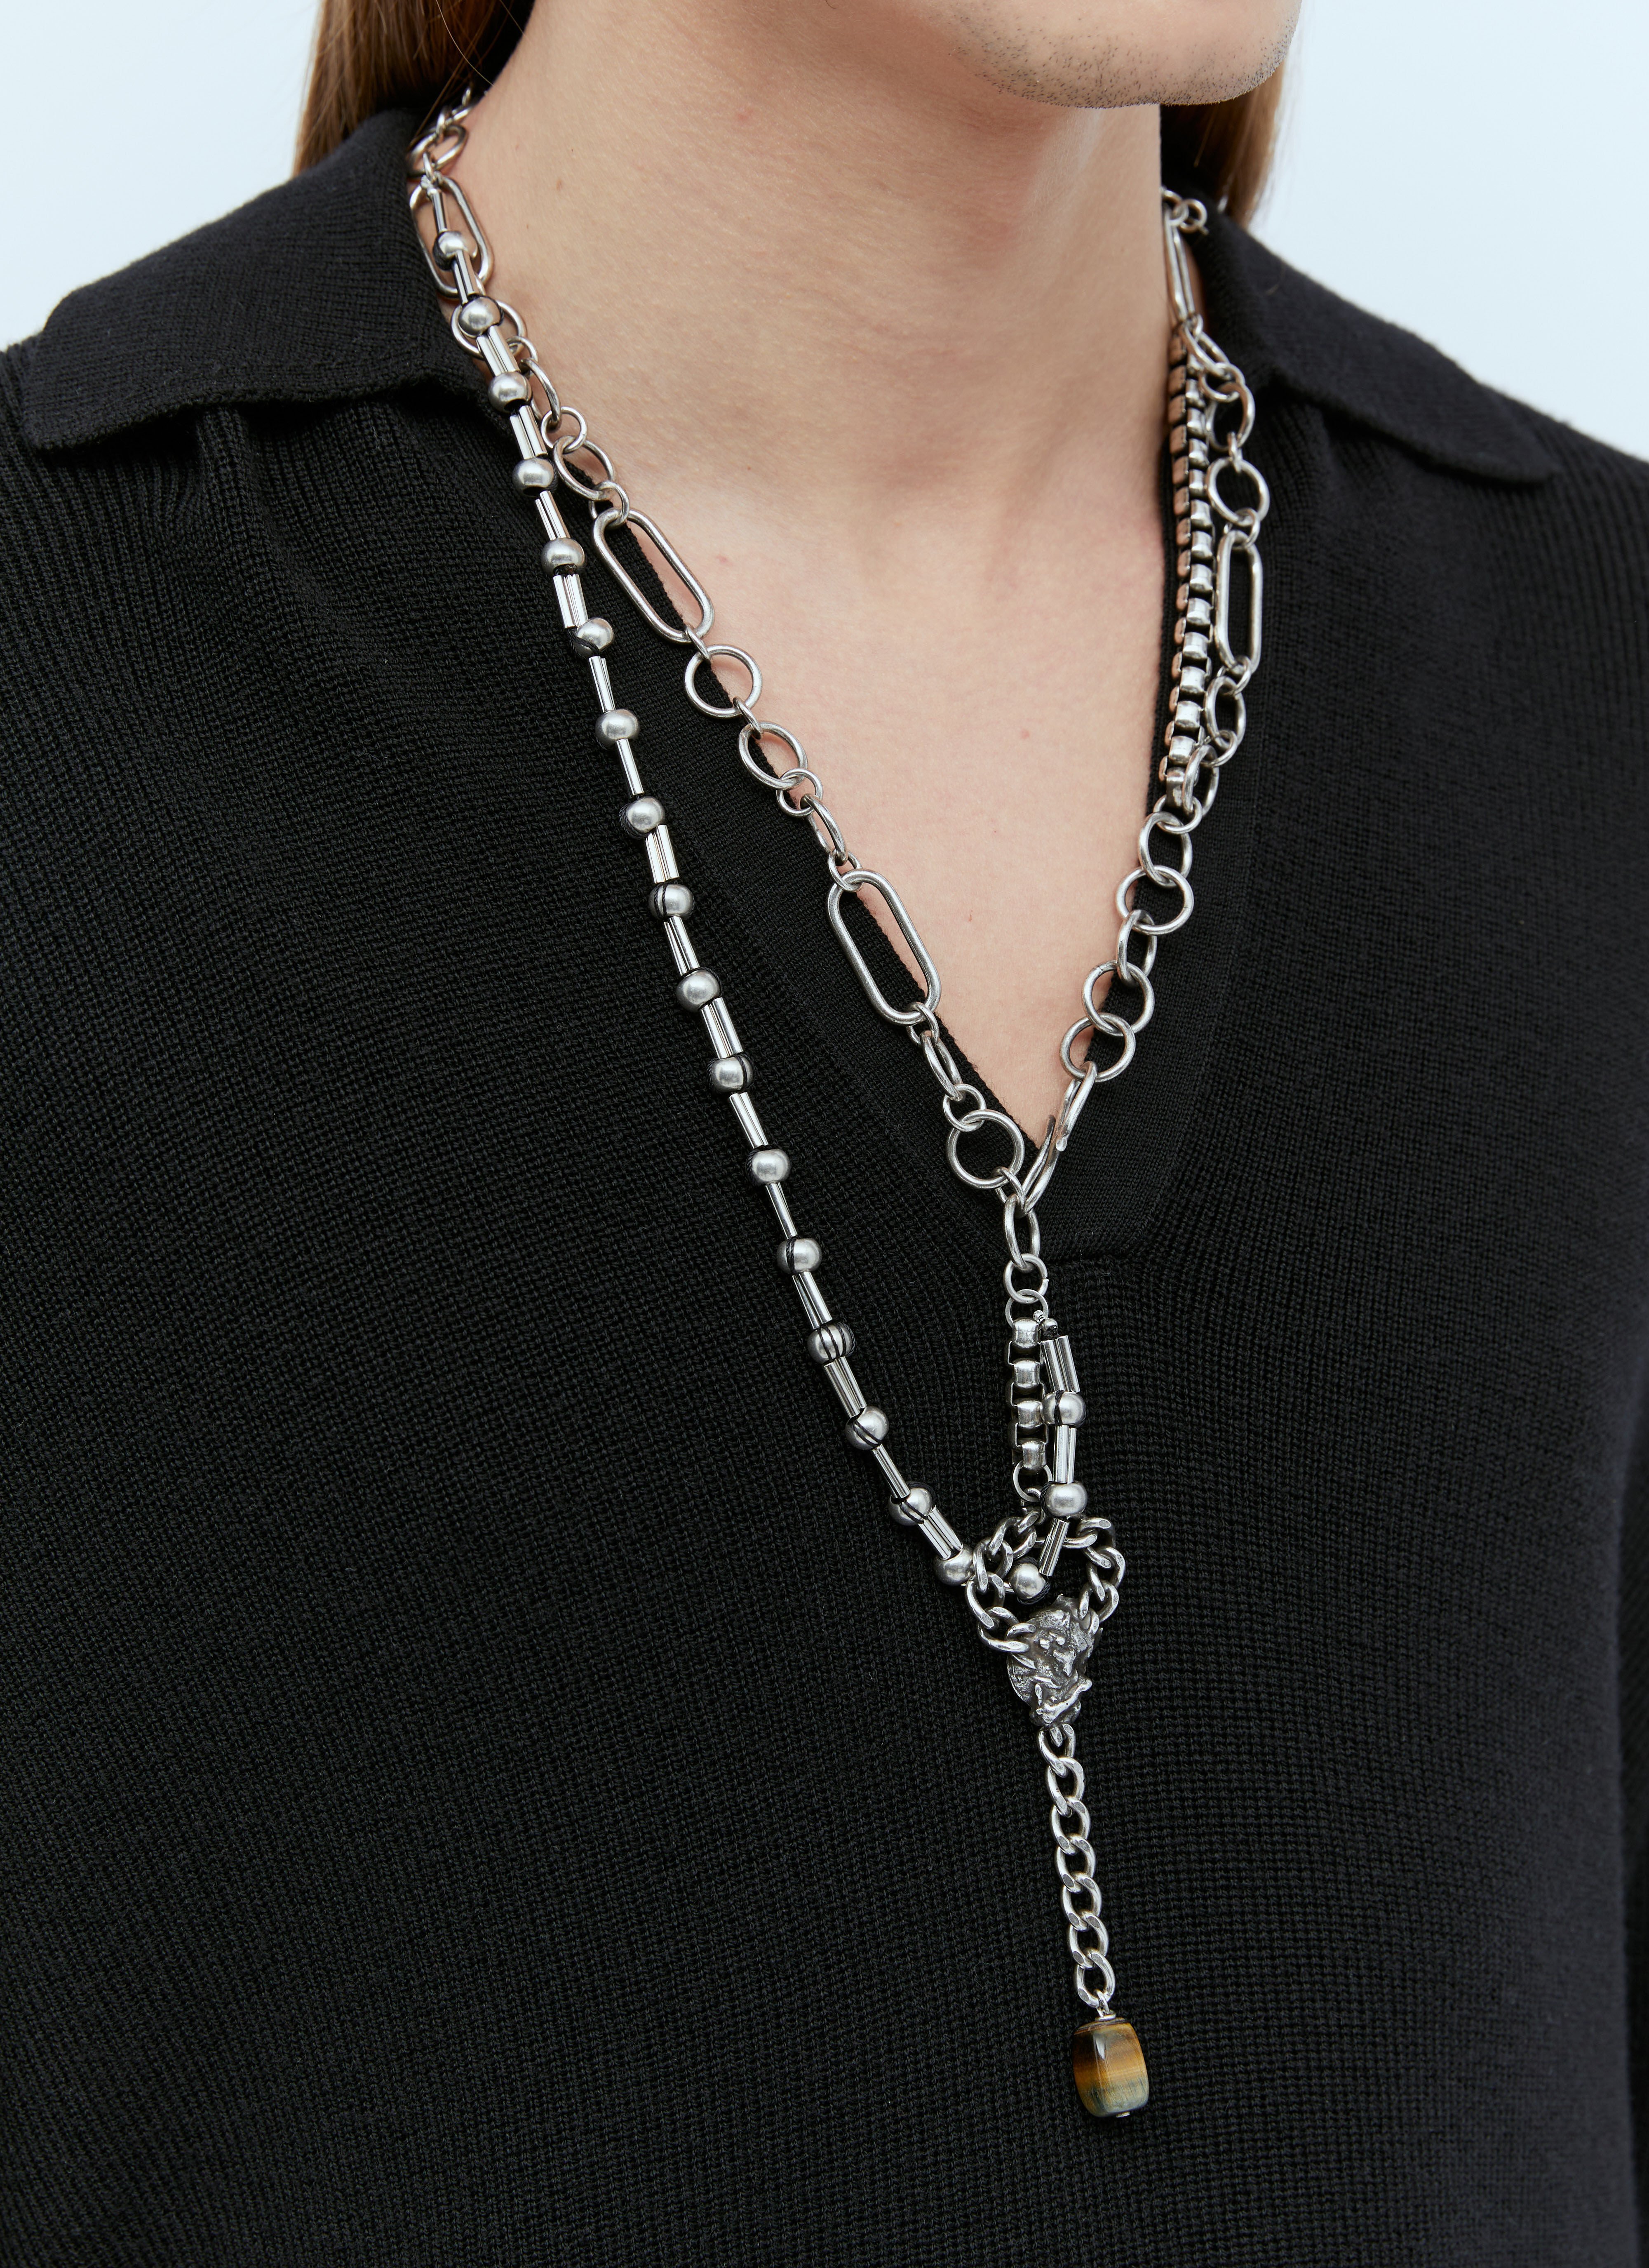 VETEMENTS Contrast Chain Necklace With Tiger Pendant Green vet0156015